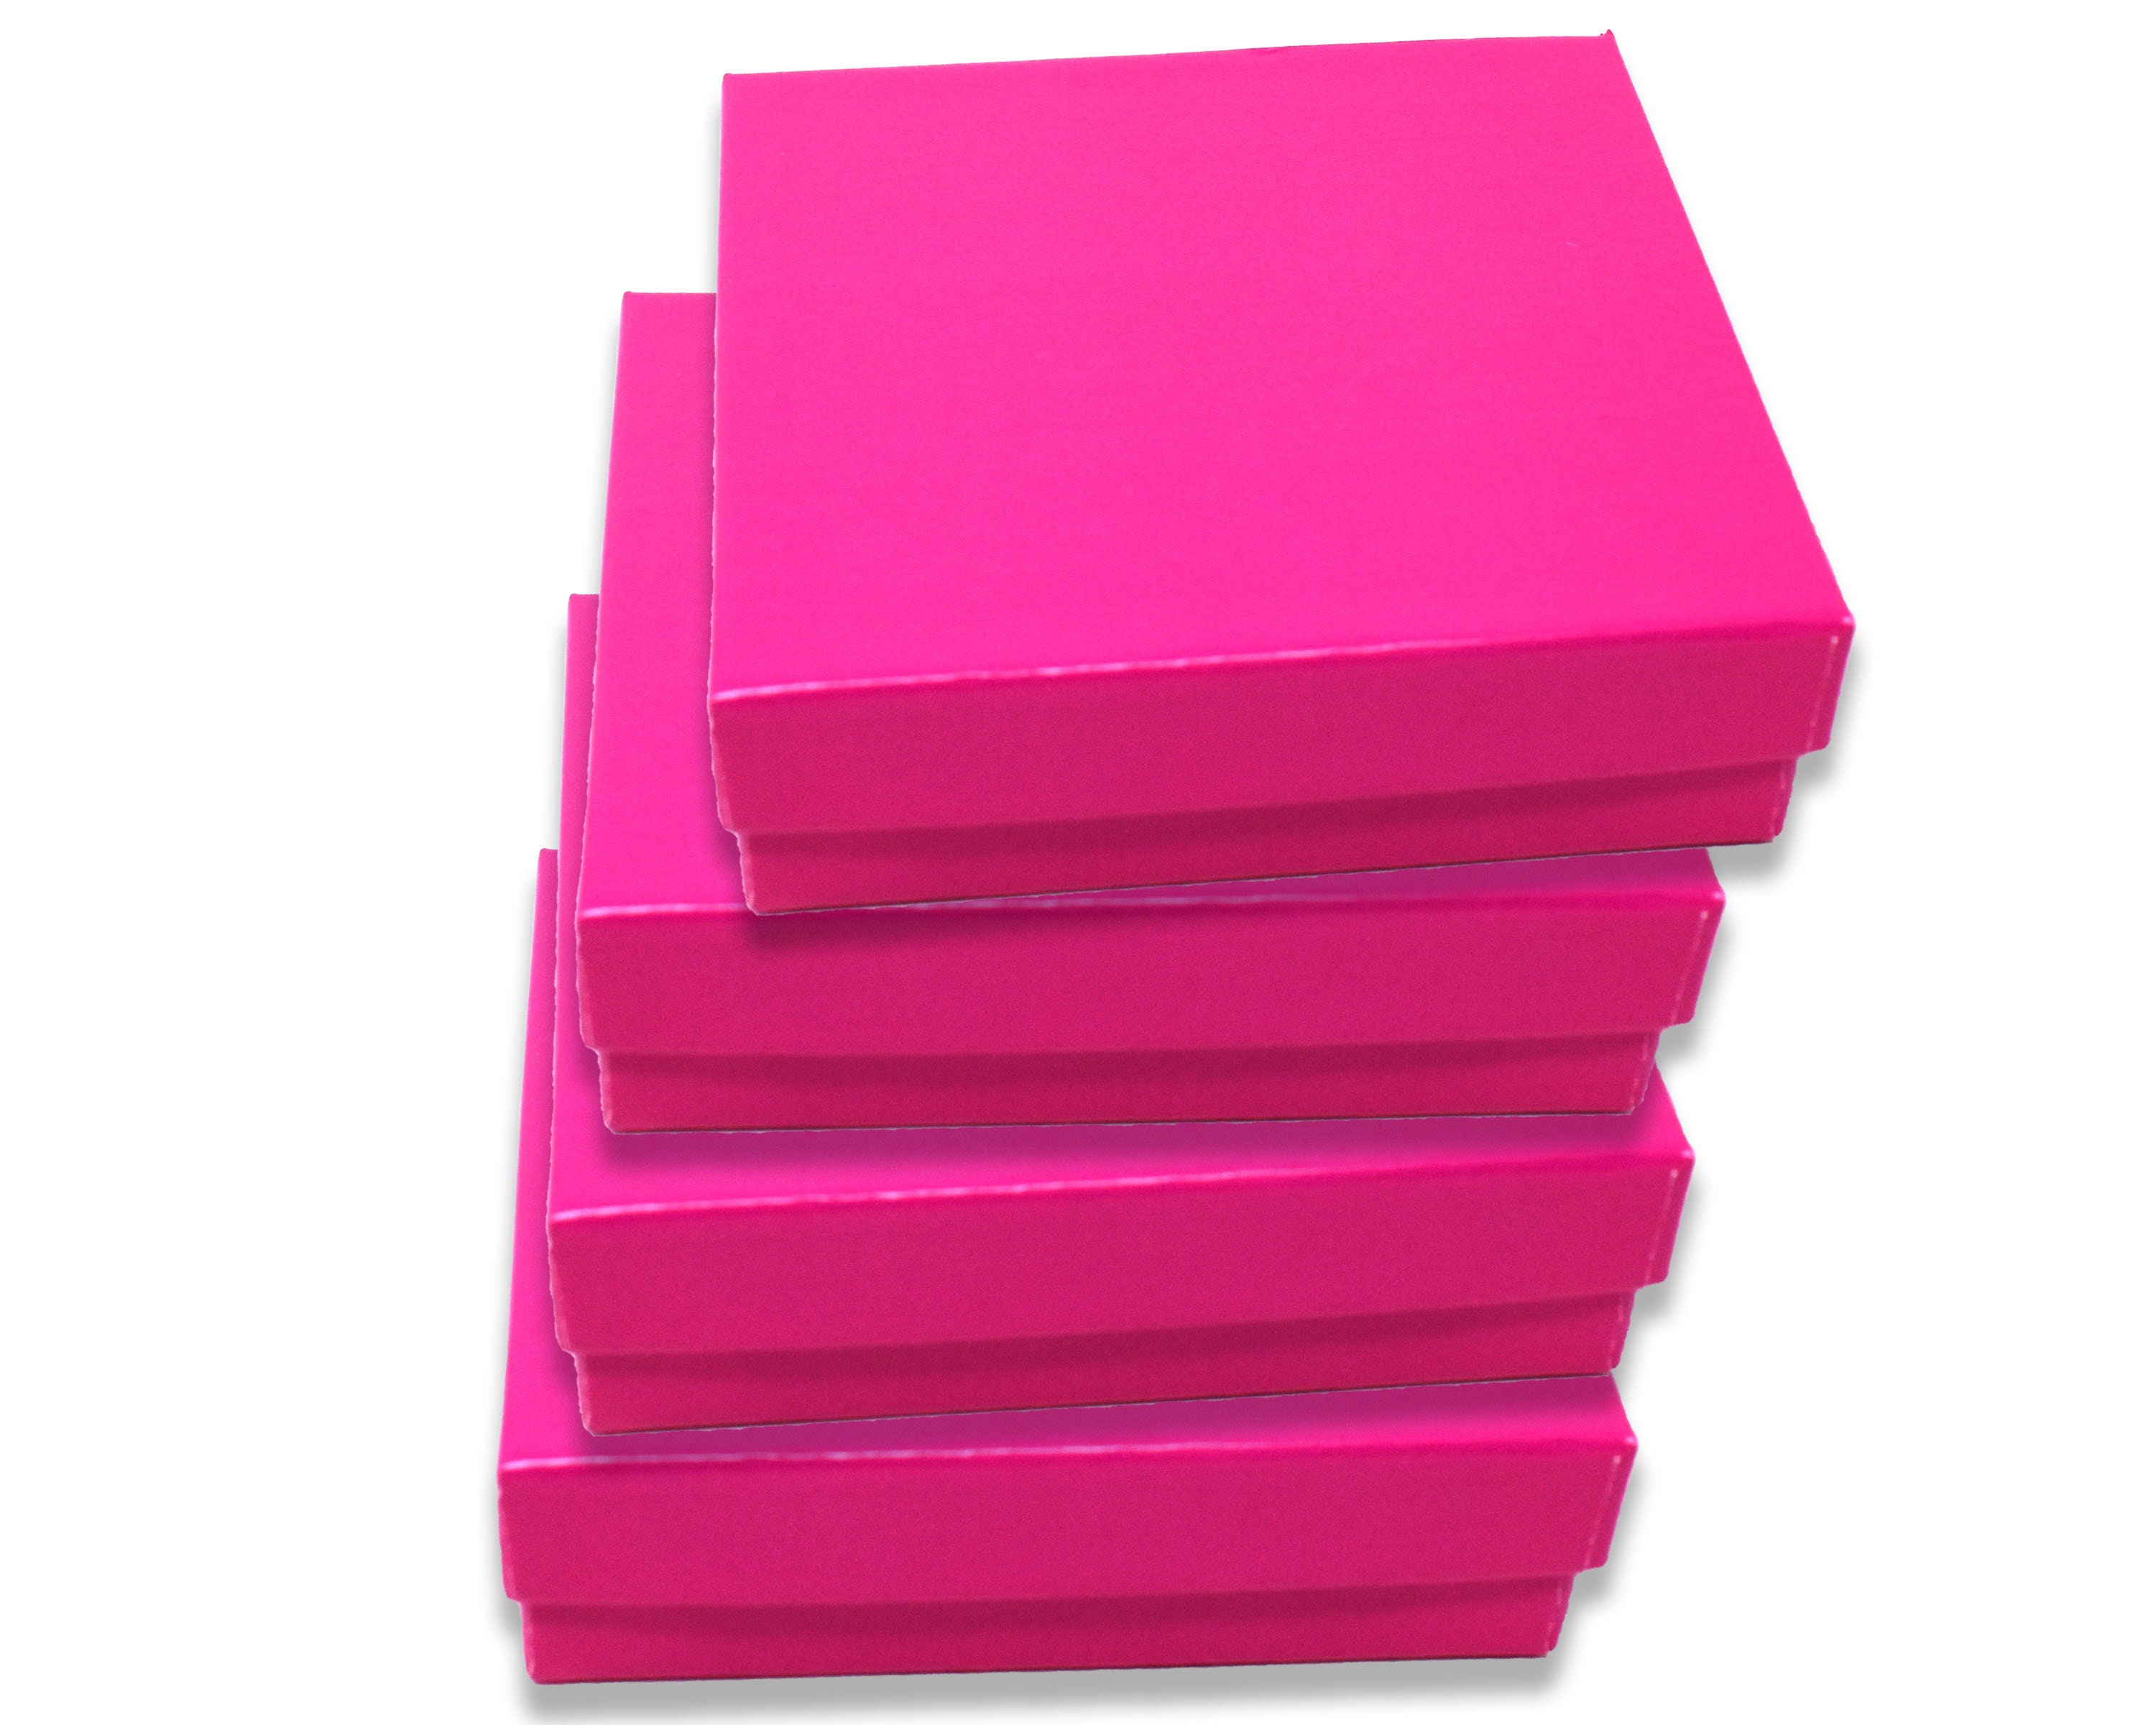 Hot Pink 3.5x3.5x1 Inch Cotton Filled Jewelry Boxes Gift - Etsy